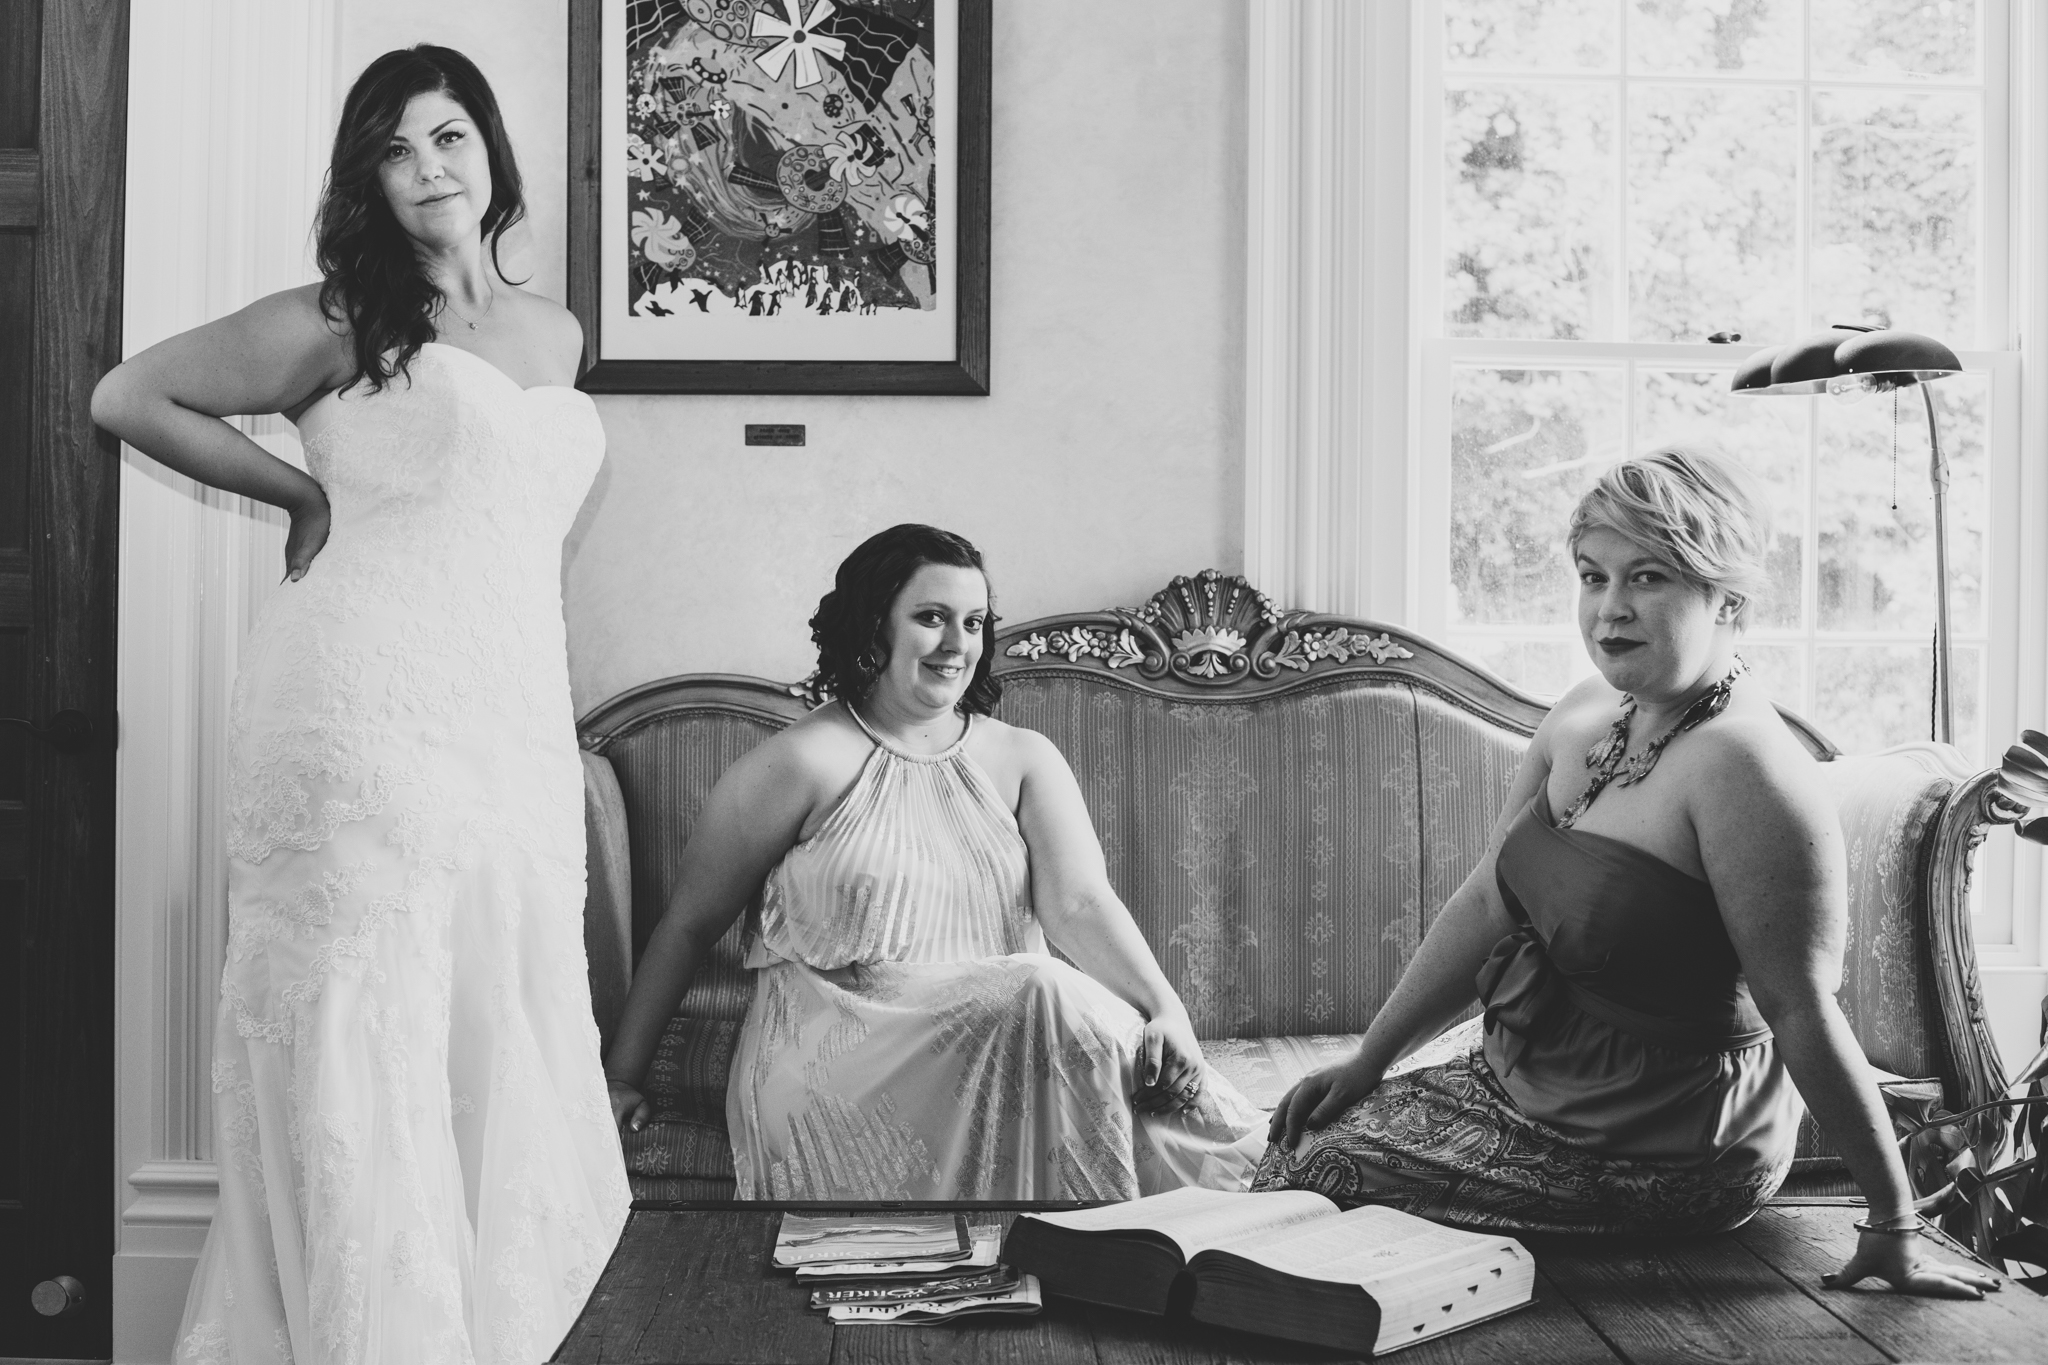 bride-and-bridesmaids-vanity-fair-style-bw